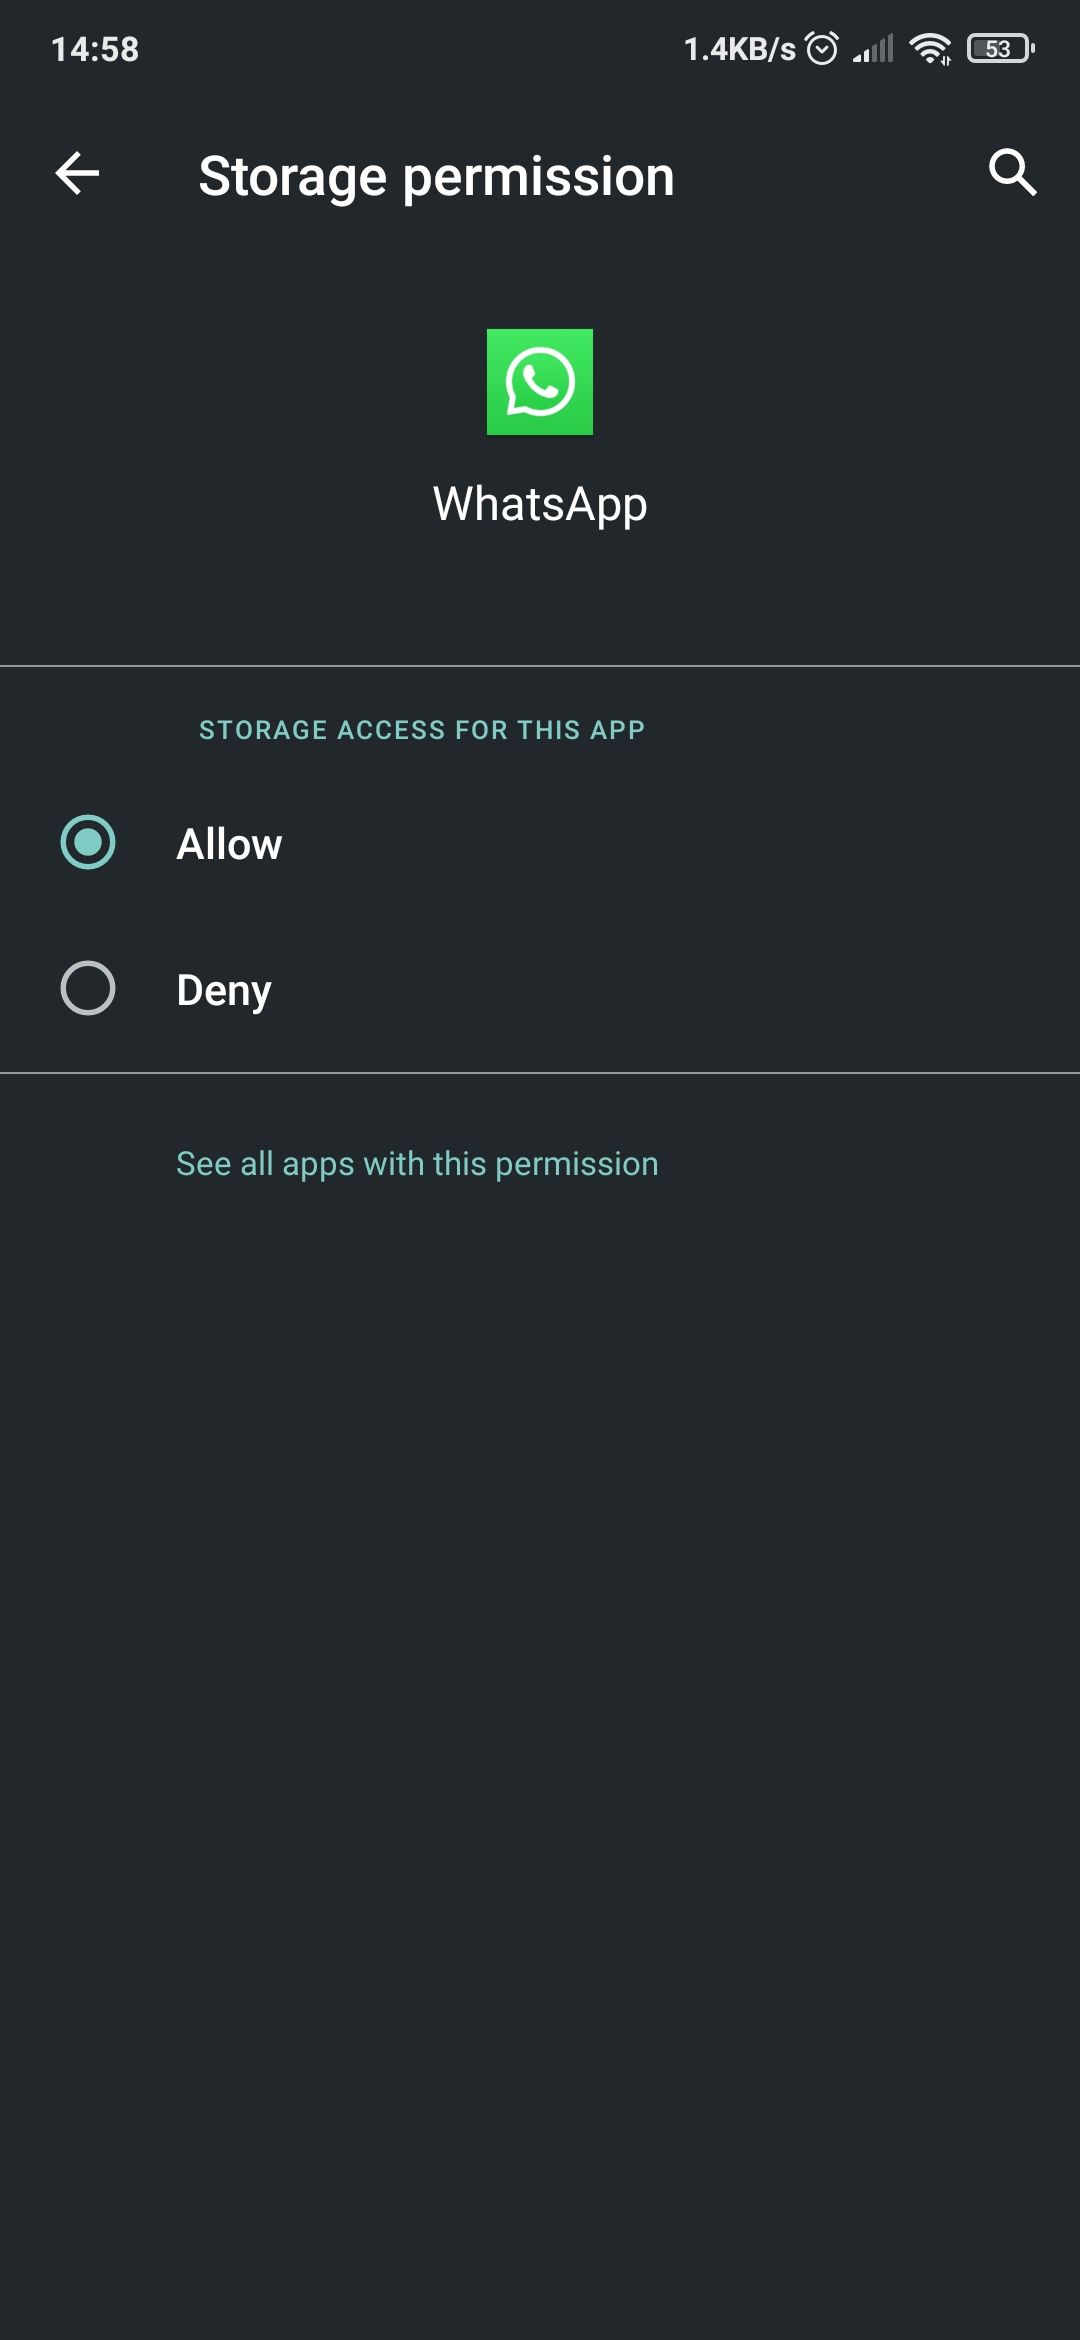 Granting WhatsApp storage permission on Android